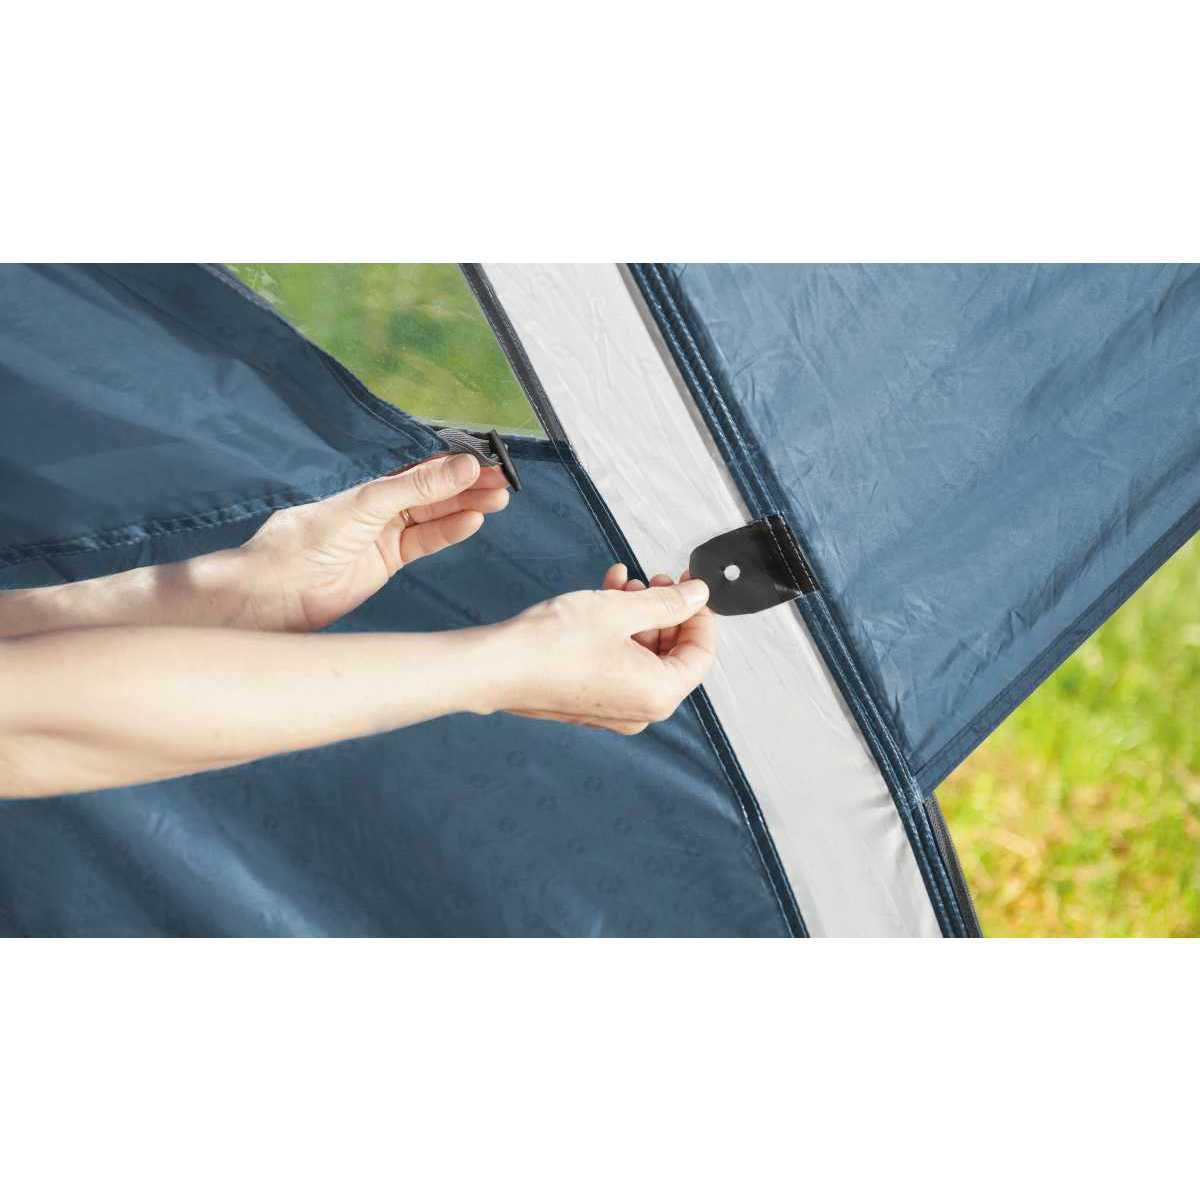 Outwell Campingzelt Cloud 3 - 111256